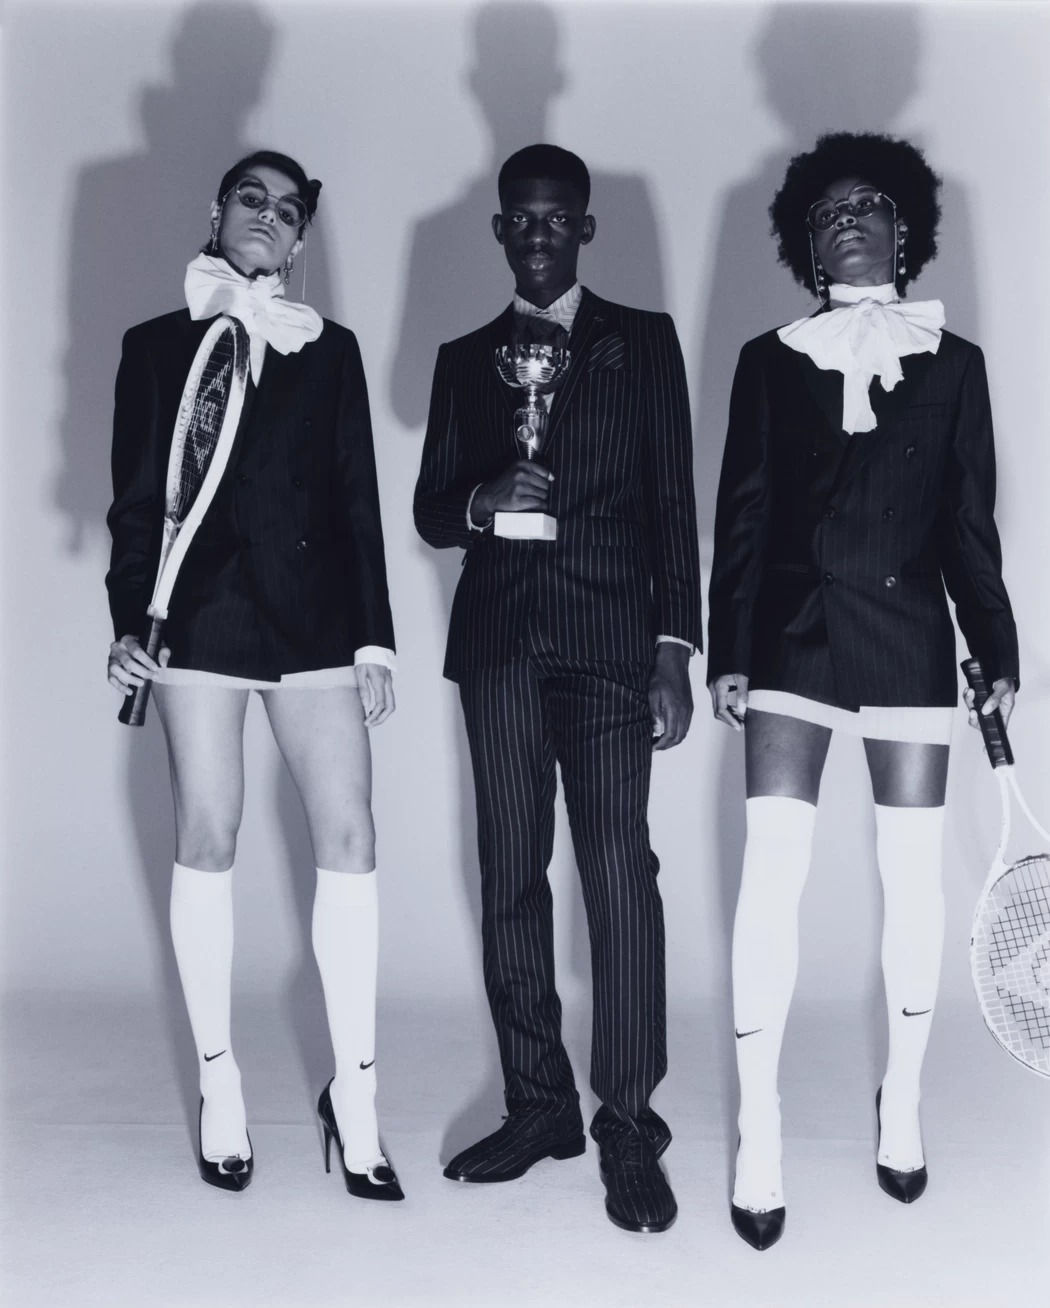 Ibrahim Kamara On How He Became One Of The Fashion Industry's Most  In-Demand Young Stylists, British Vogue